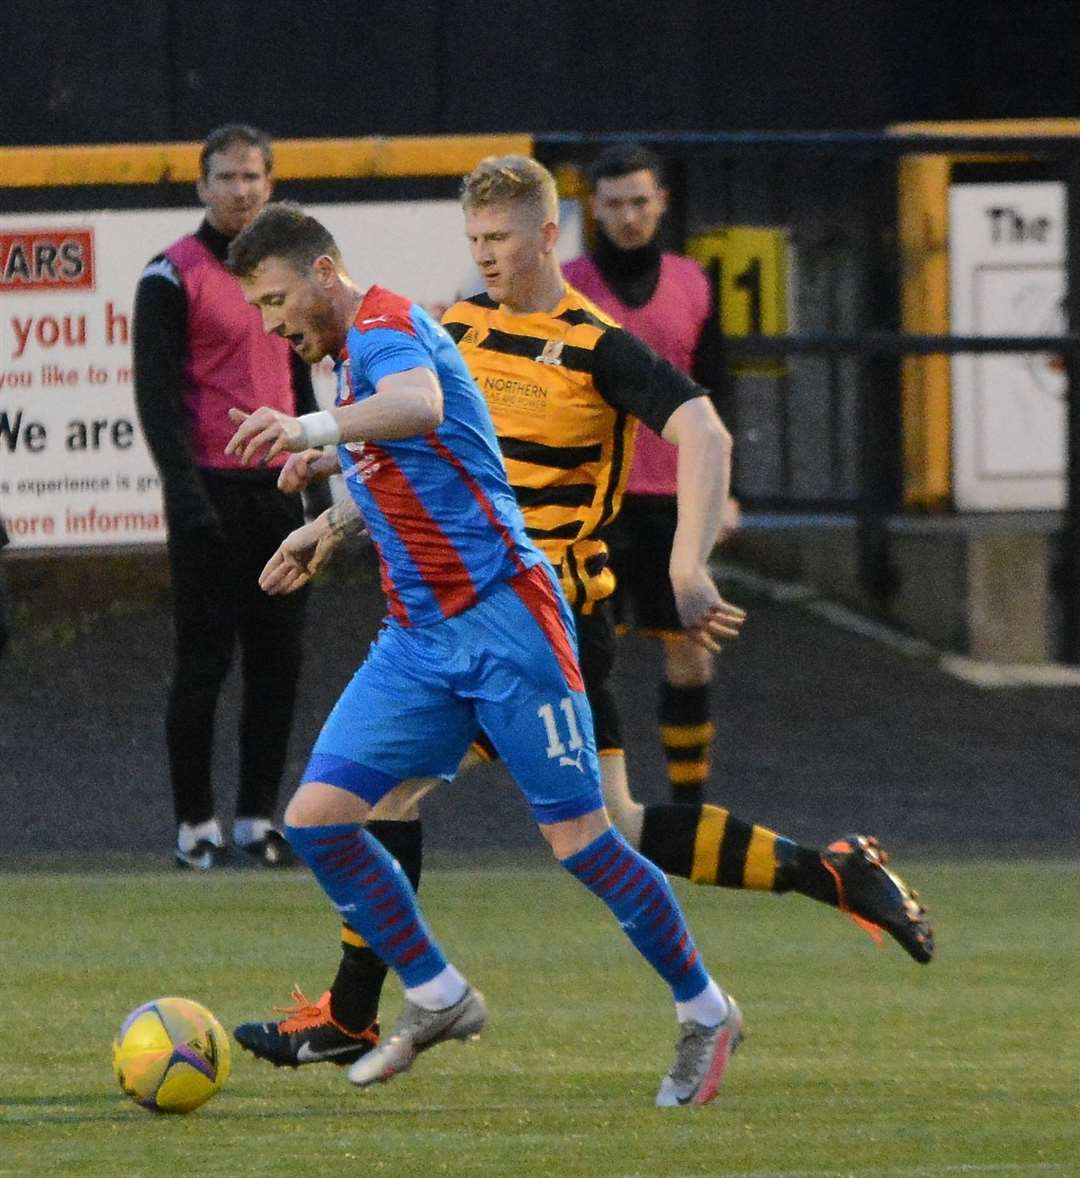 Shane Sutherland tries to move forward with the ball for Inverness Caledonian Thistle against Alloa Athletic.